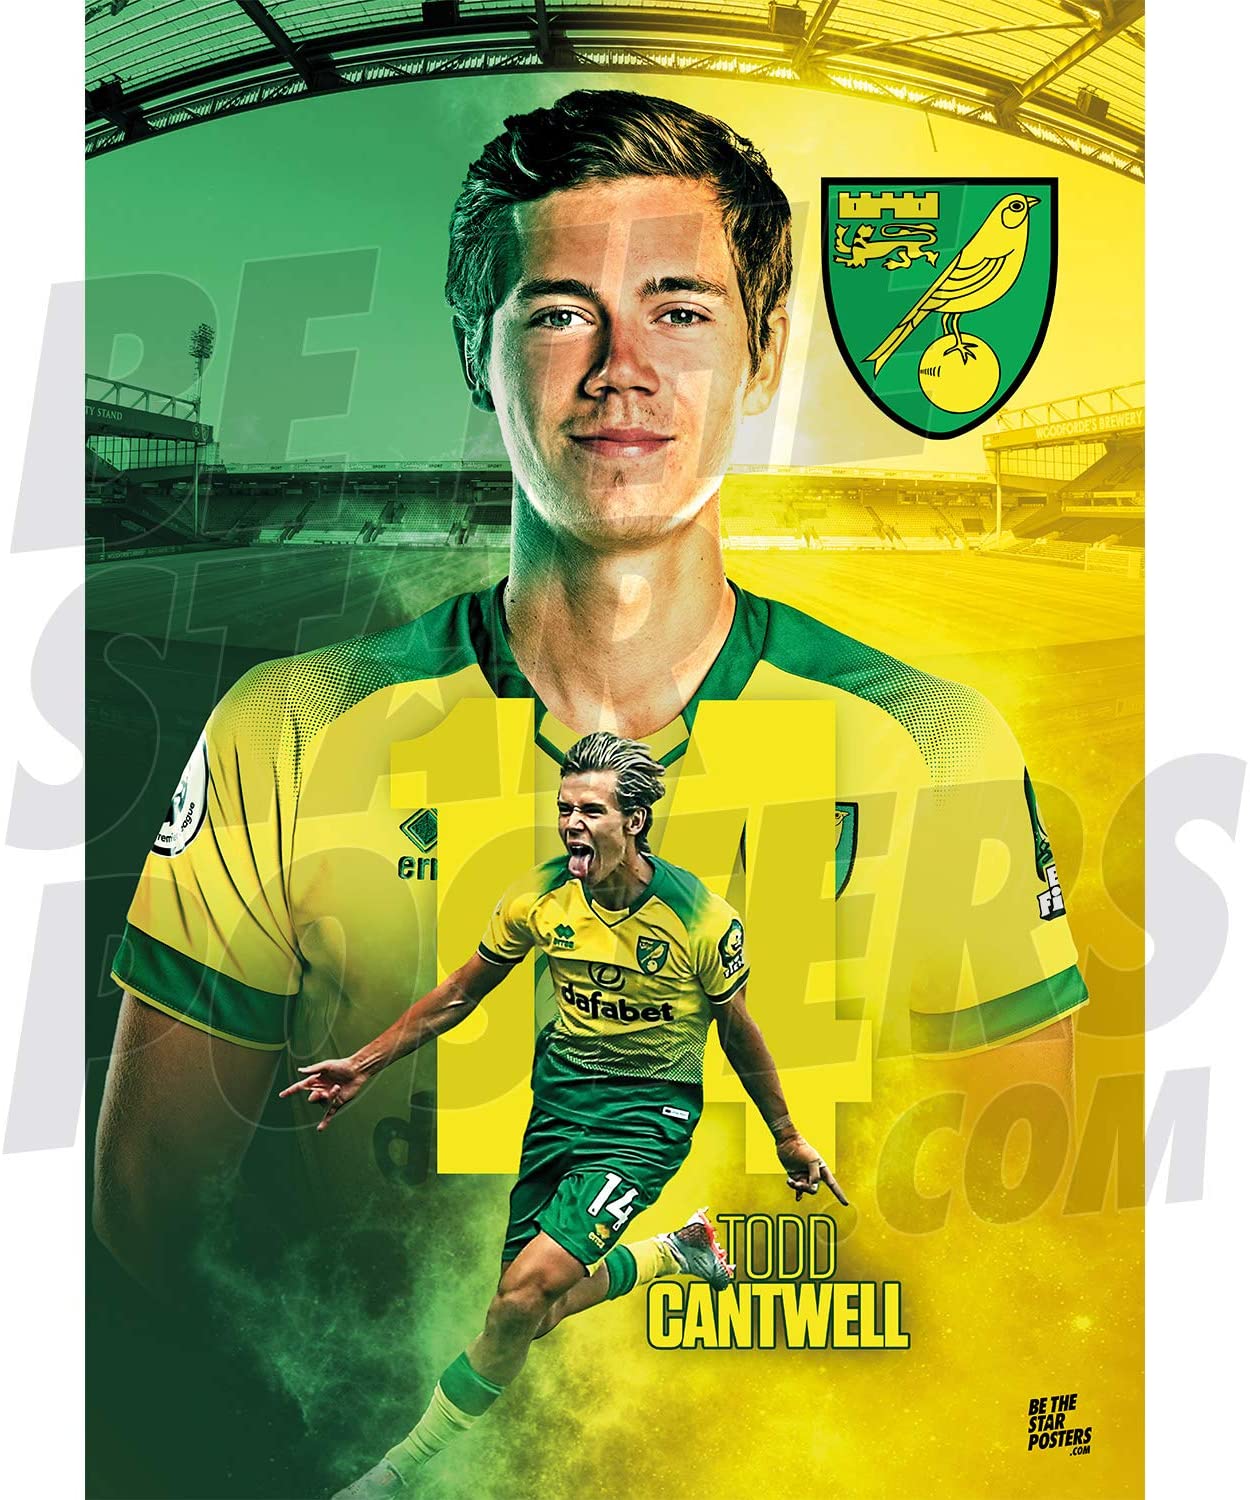 Be The Star Posters Norwich City FC Todd Cantwell 2019 20 Action Football Poster Licensed Product In Sizes A3 & A2: Amazon.co.uk: Sports & Outdoors